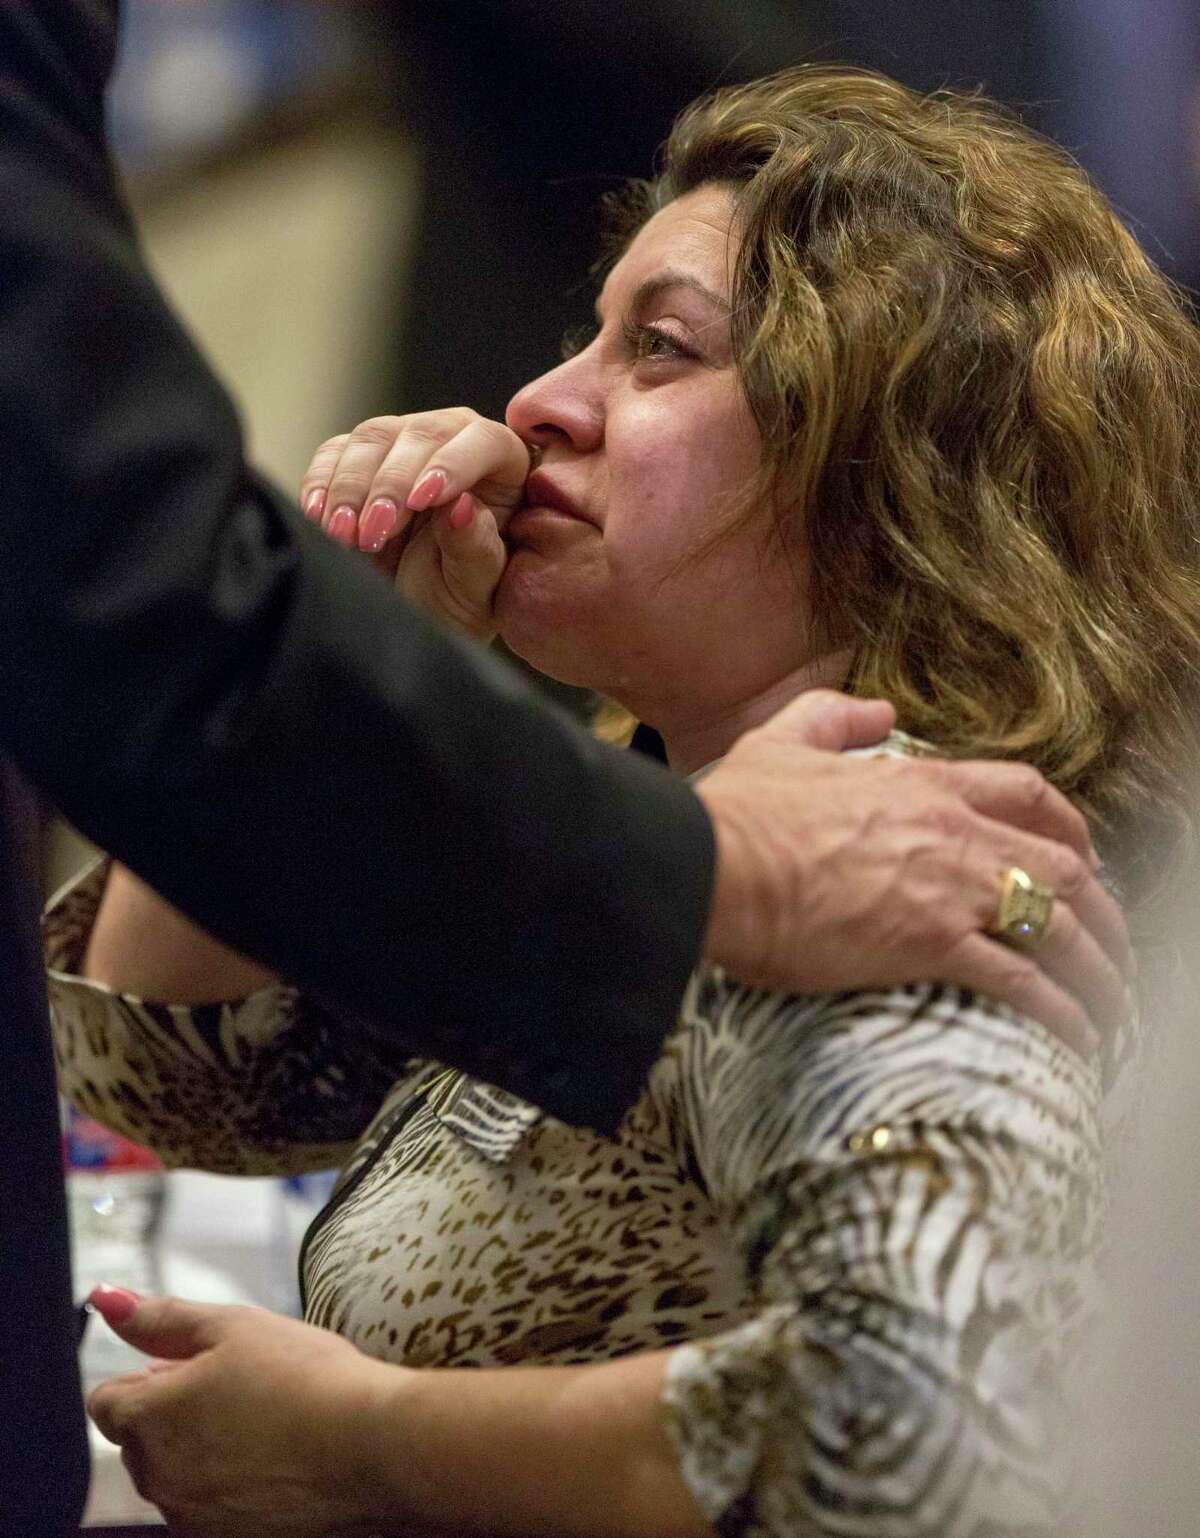 Frances Hall talks to one of her lawyers moments after the jury left the courtroom to begin deliberations in the punishment phase of Hall's 2016 murder trial. Hall was convicted of killing her husband, trucking tycoon Bill Hall, by running his motorcycle off the road with her Cadillac SUV.